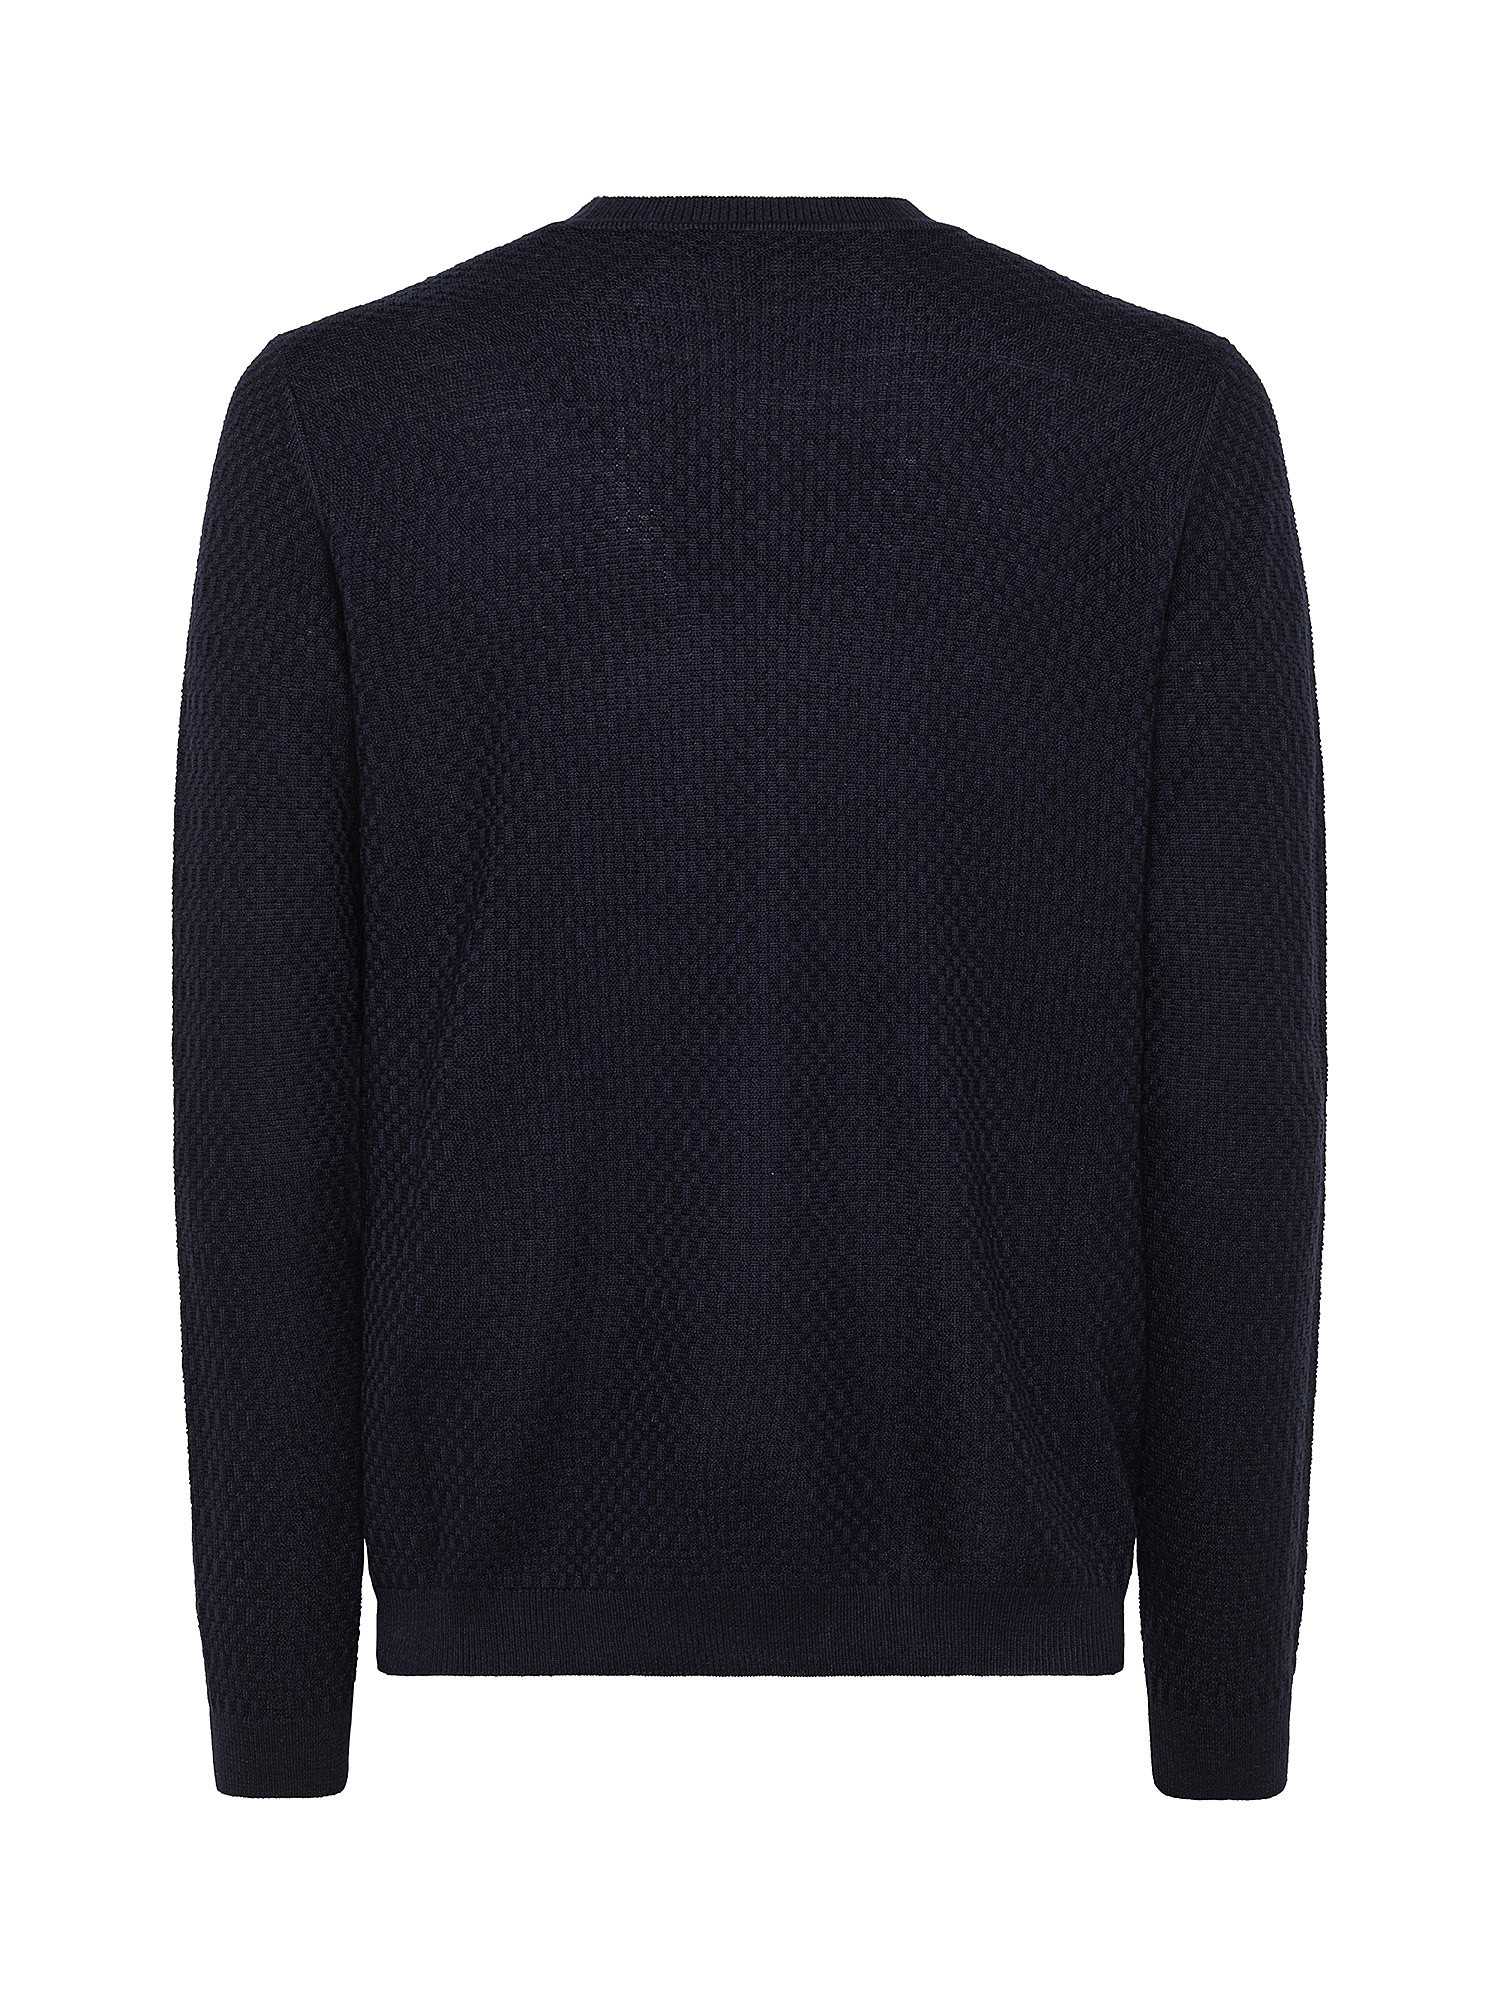 Crewneck sweater in wool blend, Blue, large image number 1